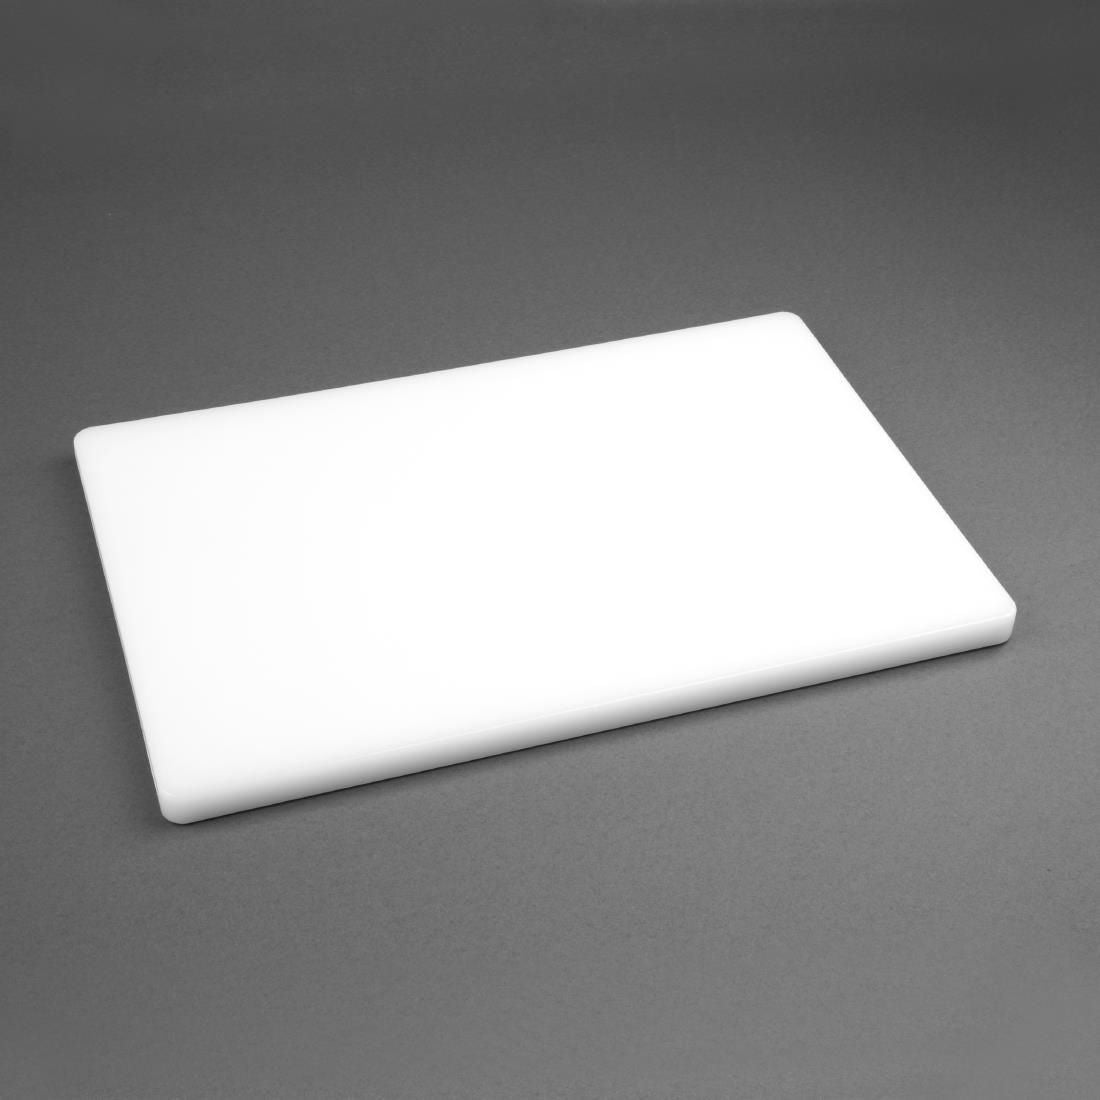 DM001 Hygiplas Extra Thick Low Density White Chopping Board Standard JD Catering Equipment Solutions Ltd